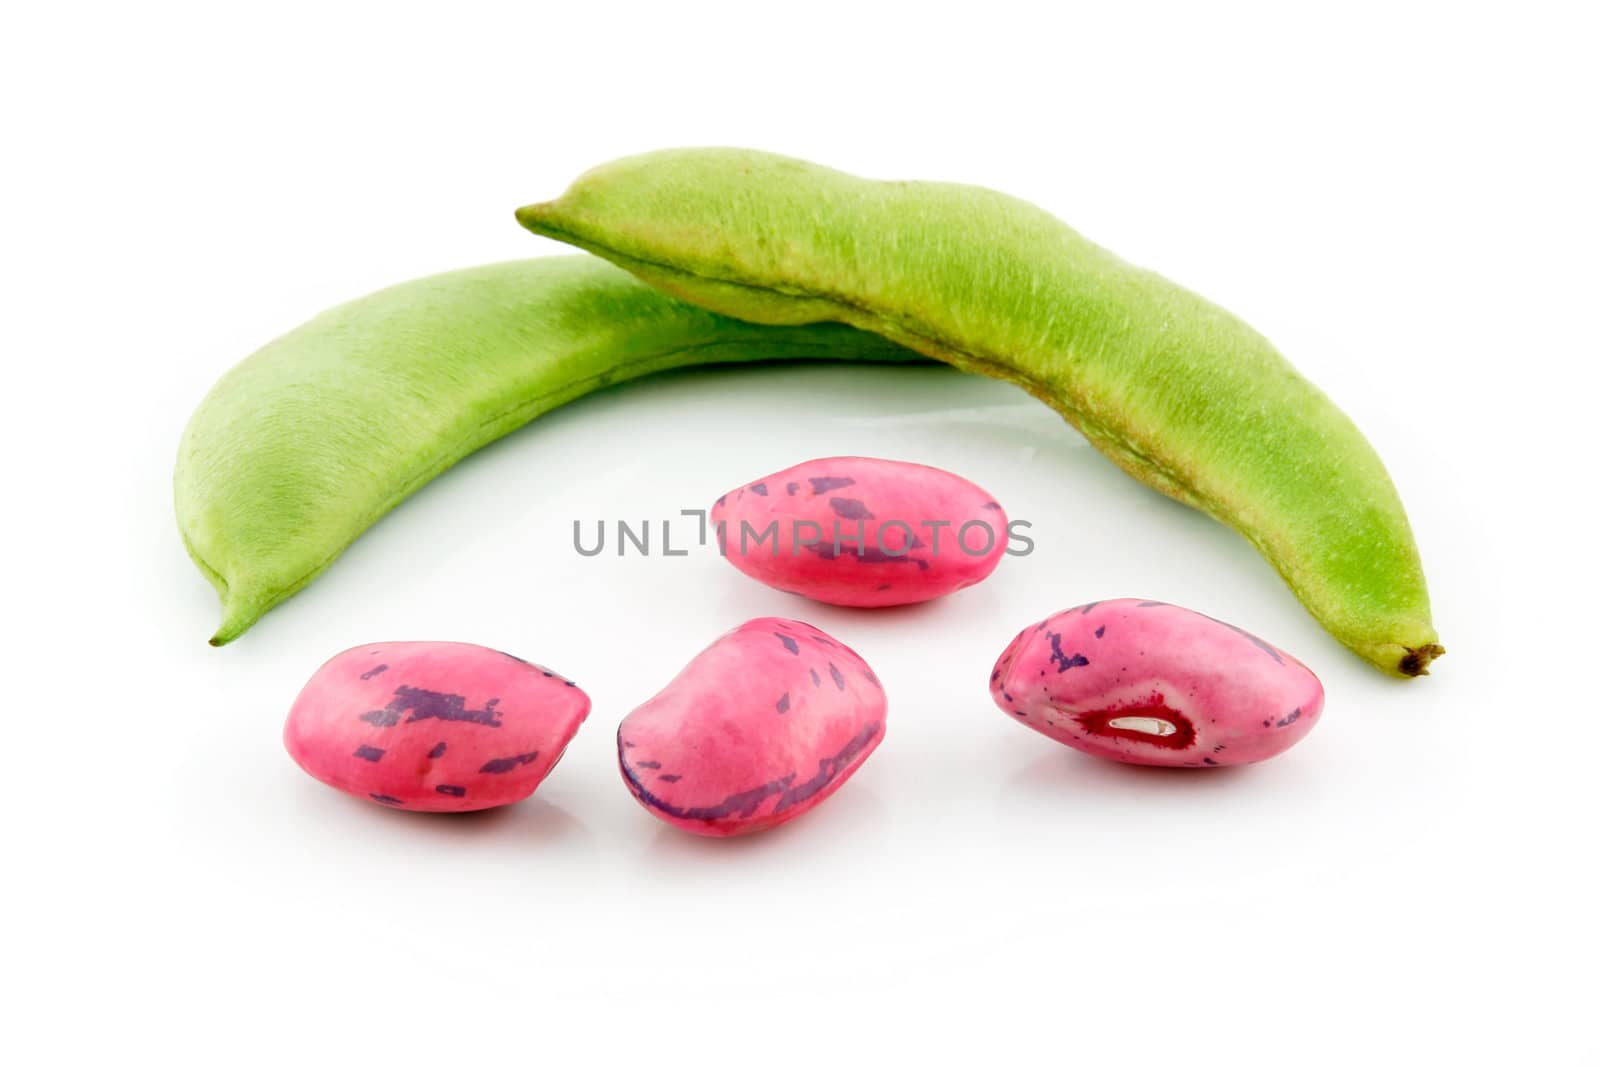 Ripe Haricot Beans with Seed Isolated on White Background